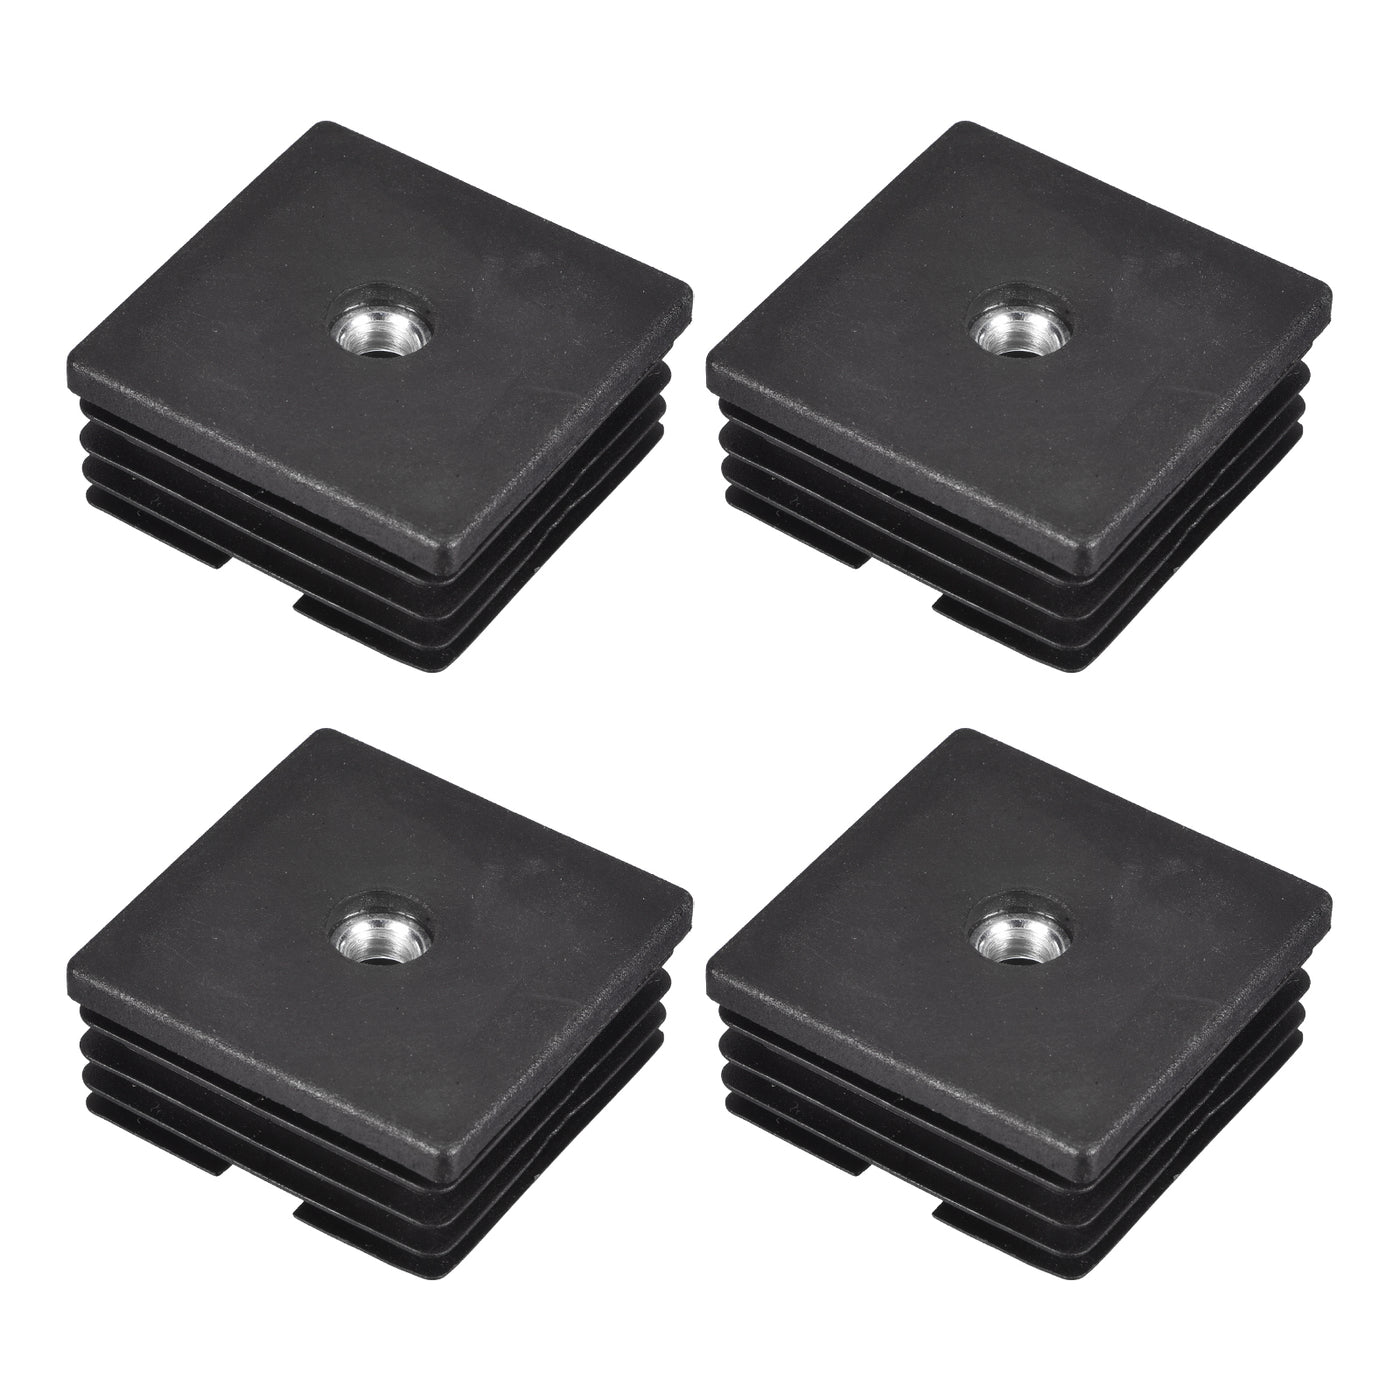 uxcell Uxcell 4Pcs 1.97"x1.97" Caster Insert with Thread, Square M8 Thread for Furniture